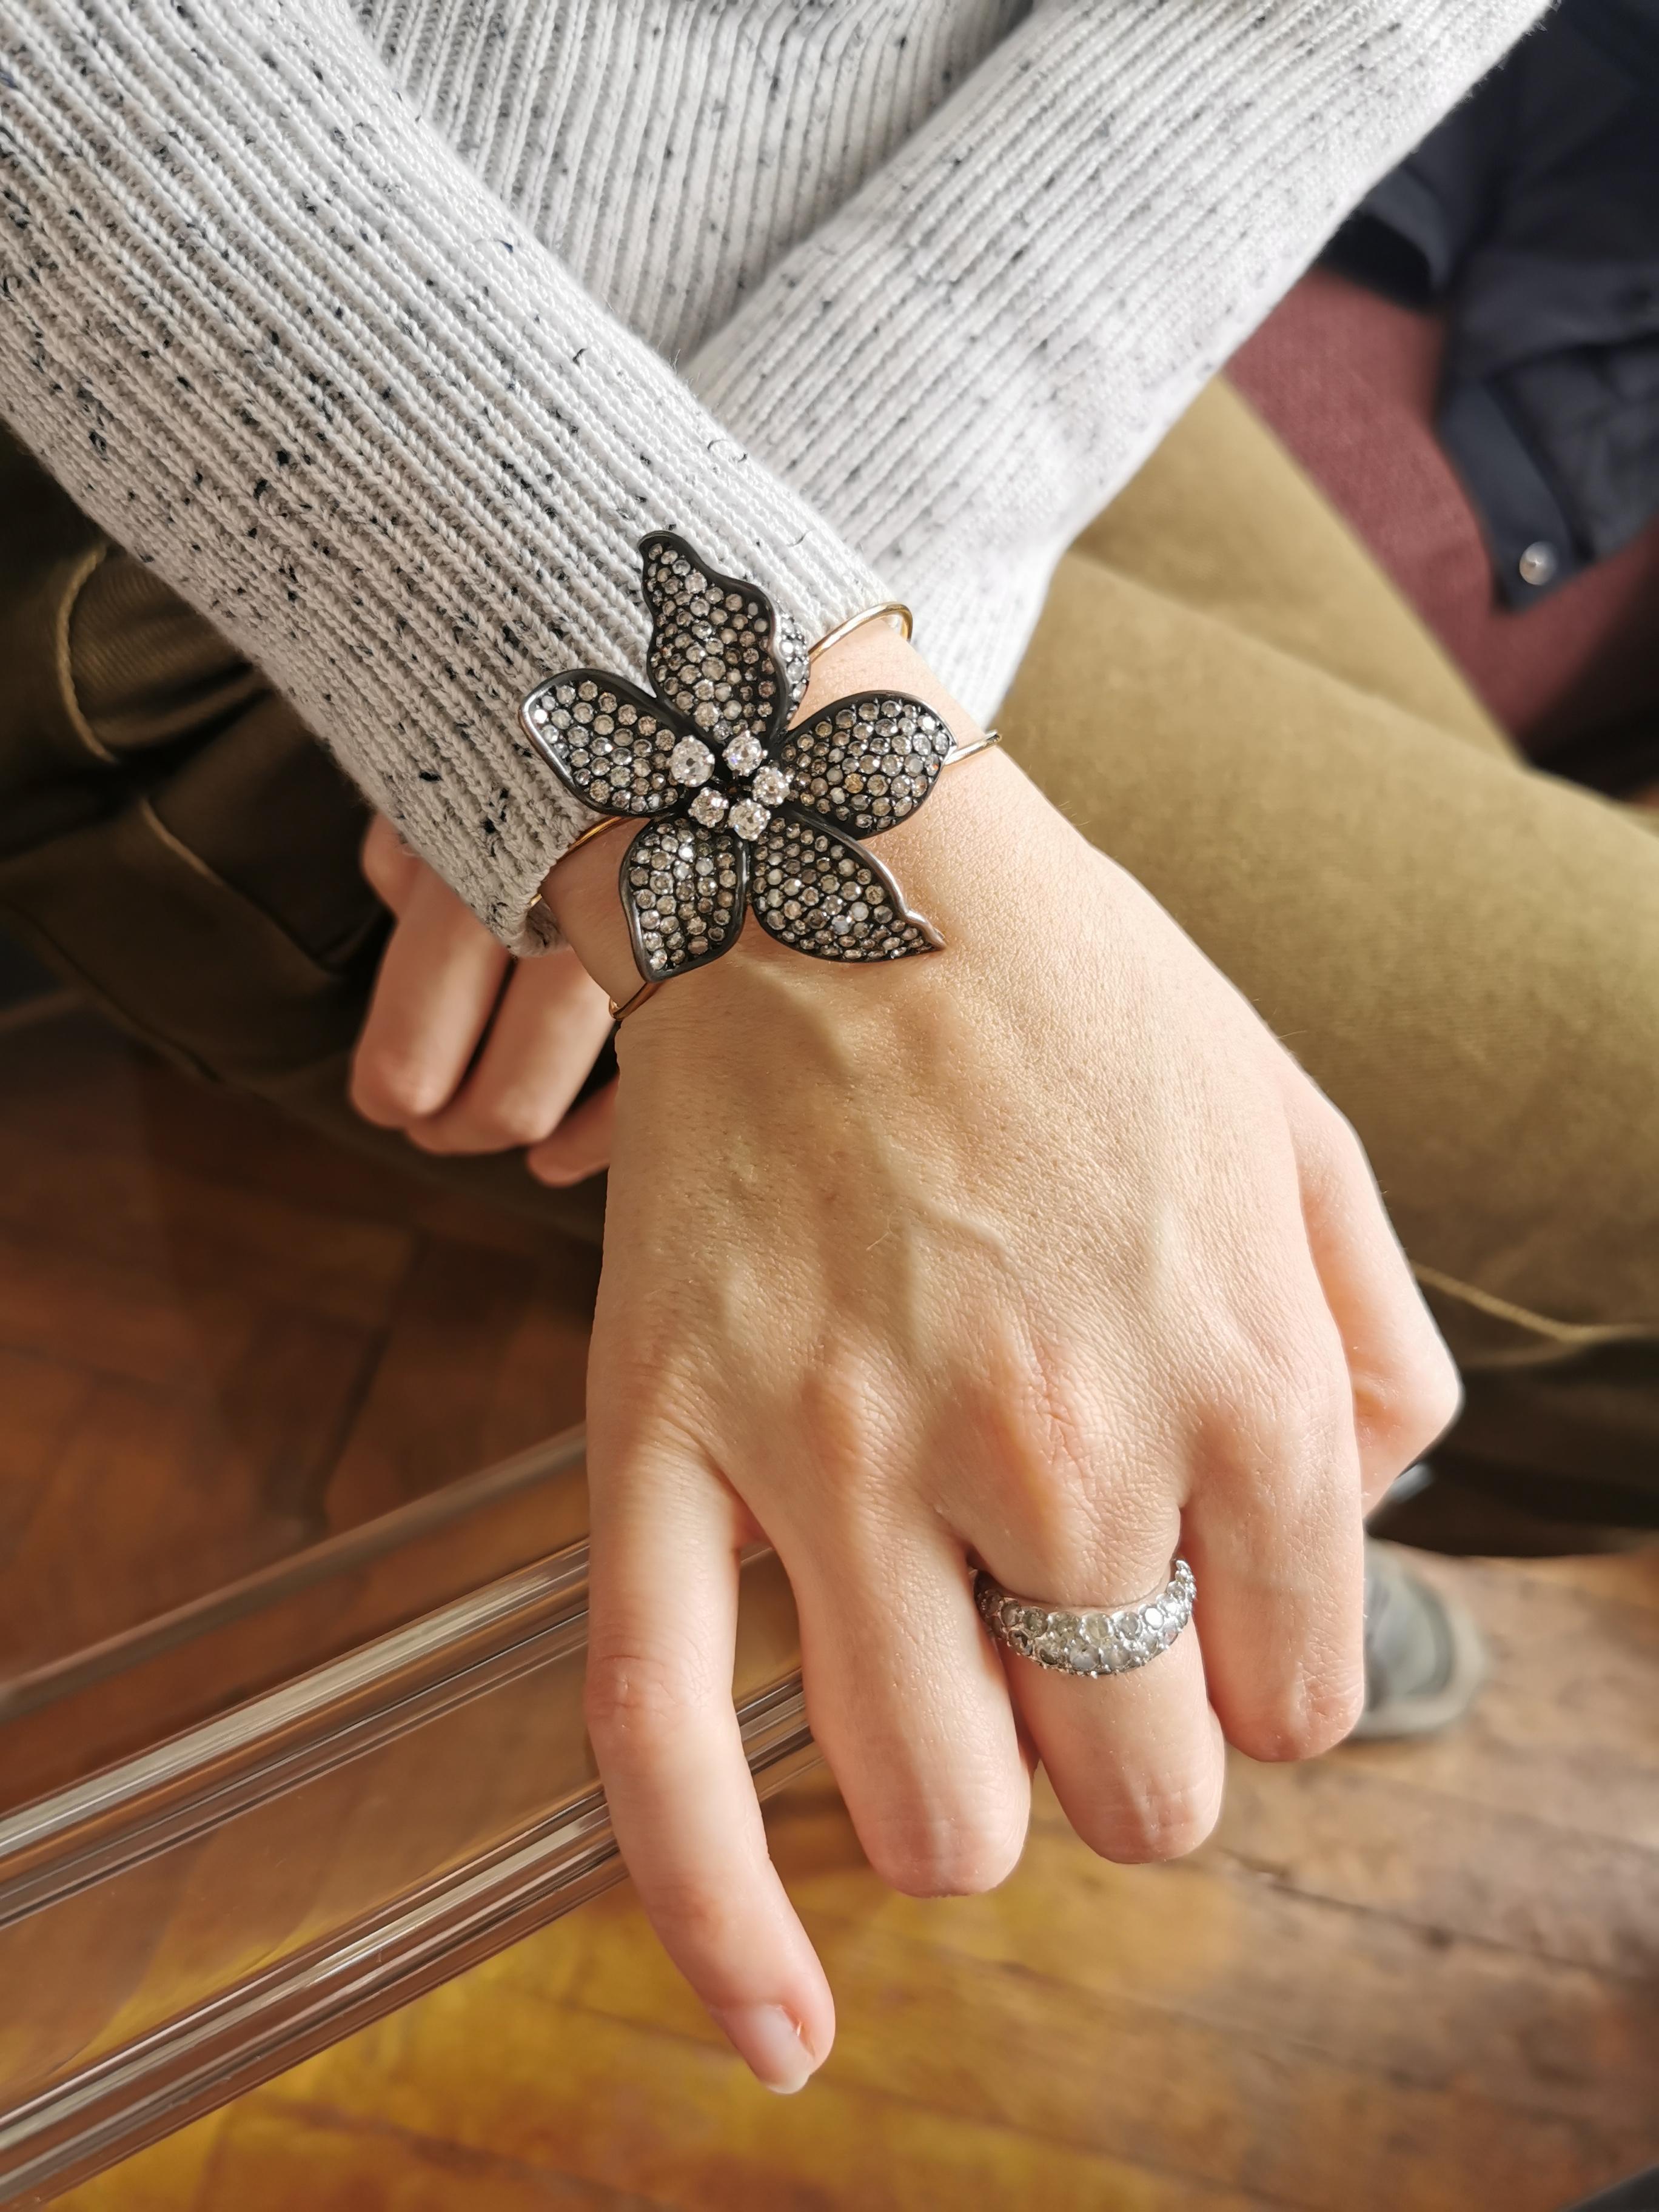 This spetacular flower has a pistil composed by five old cut diamonds and a subtle gradation of grey diamonds set. The petals movement serves as an eloquent reminder of the finesse and delicacy of the flowers.18k yellow, white gold and black